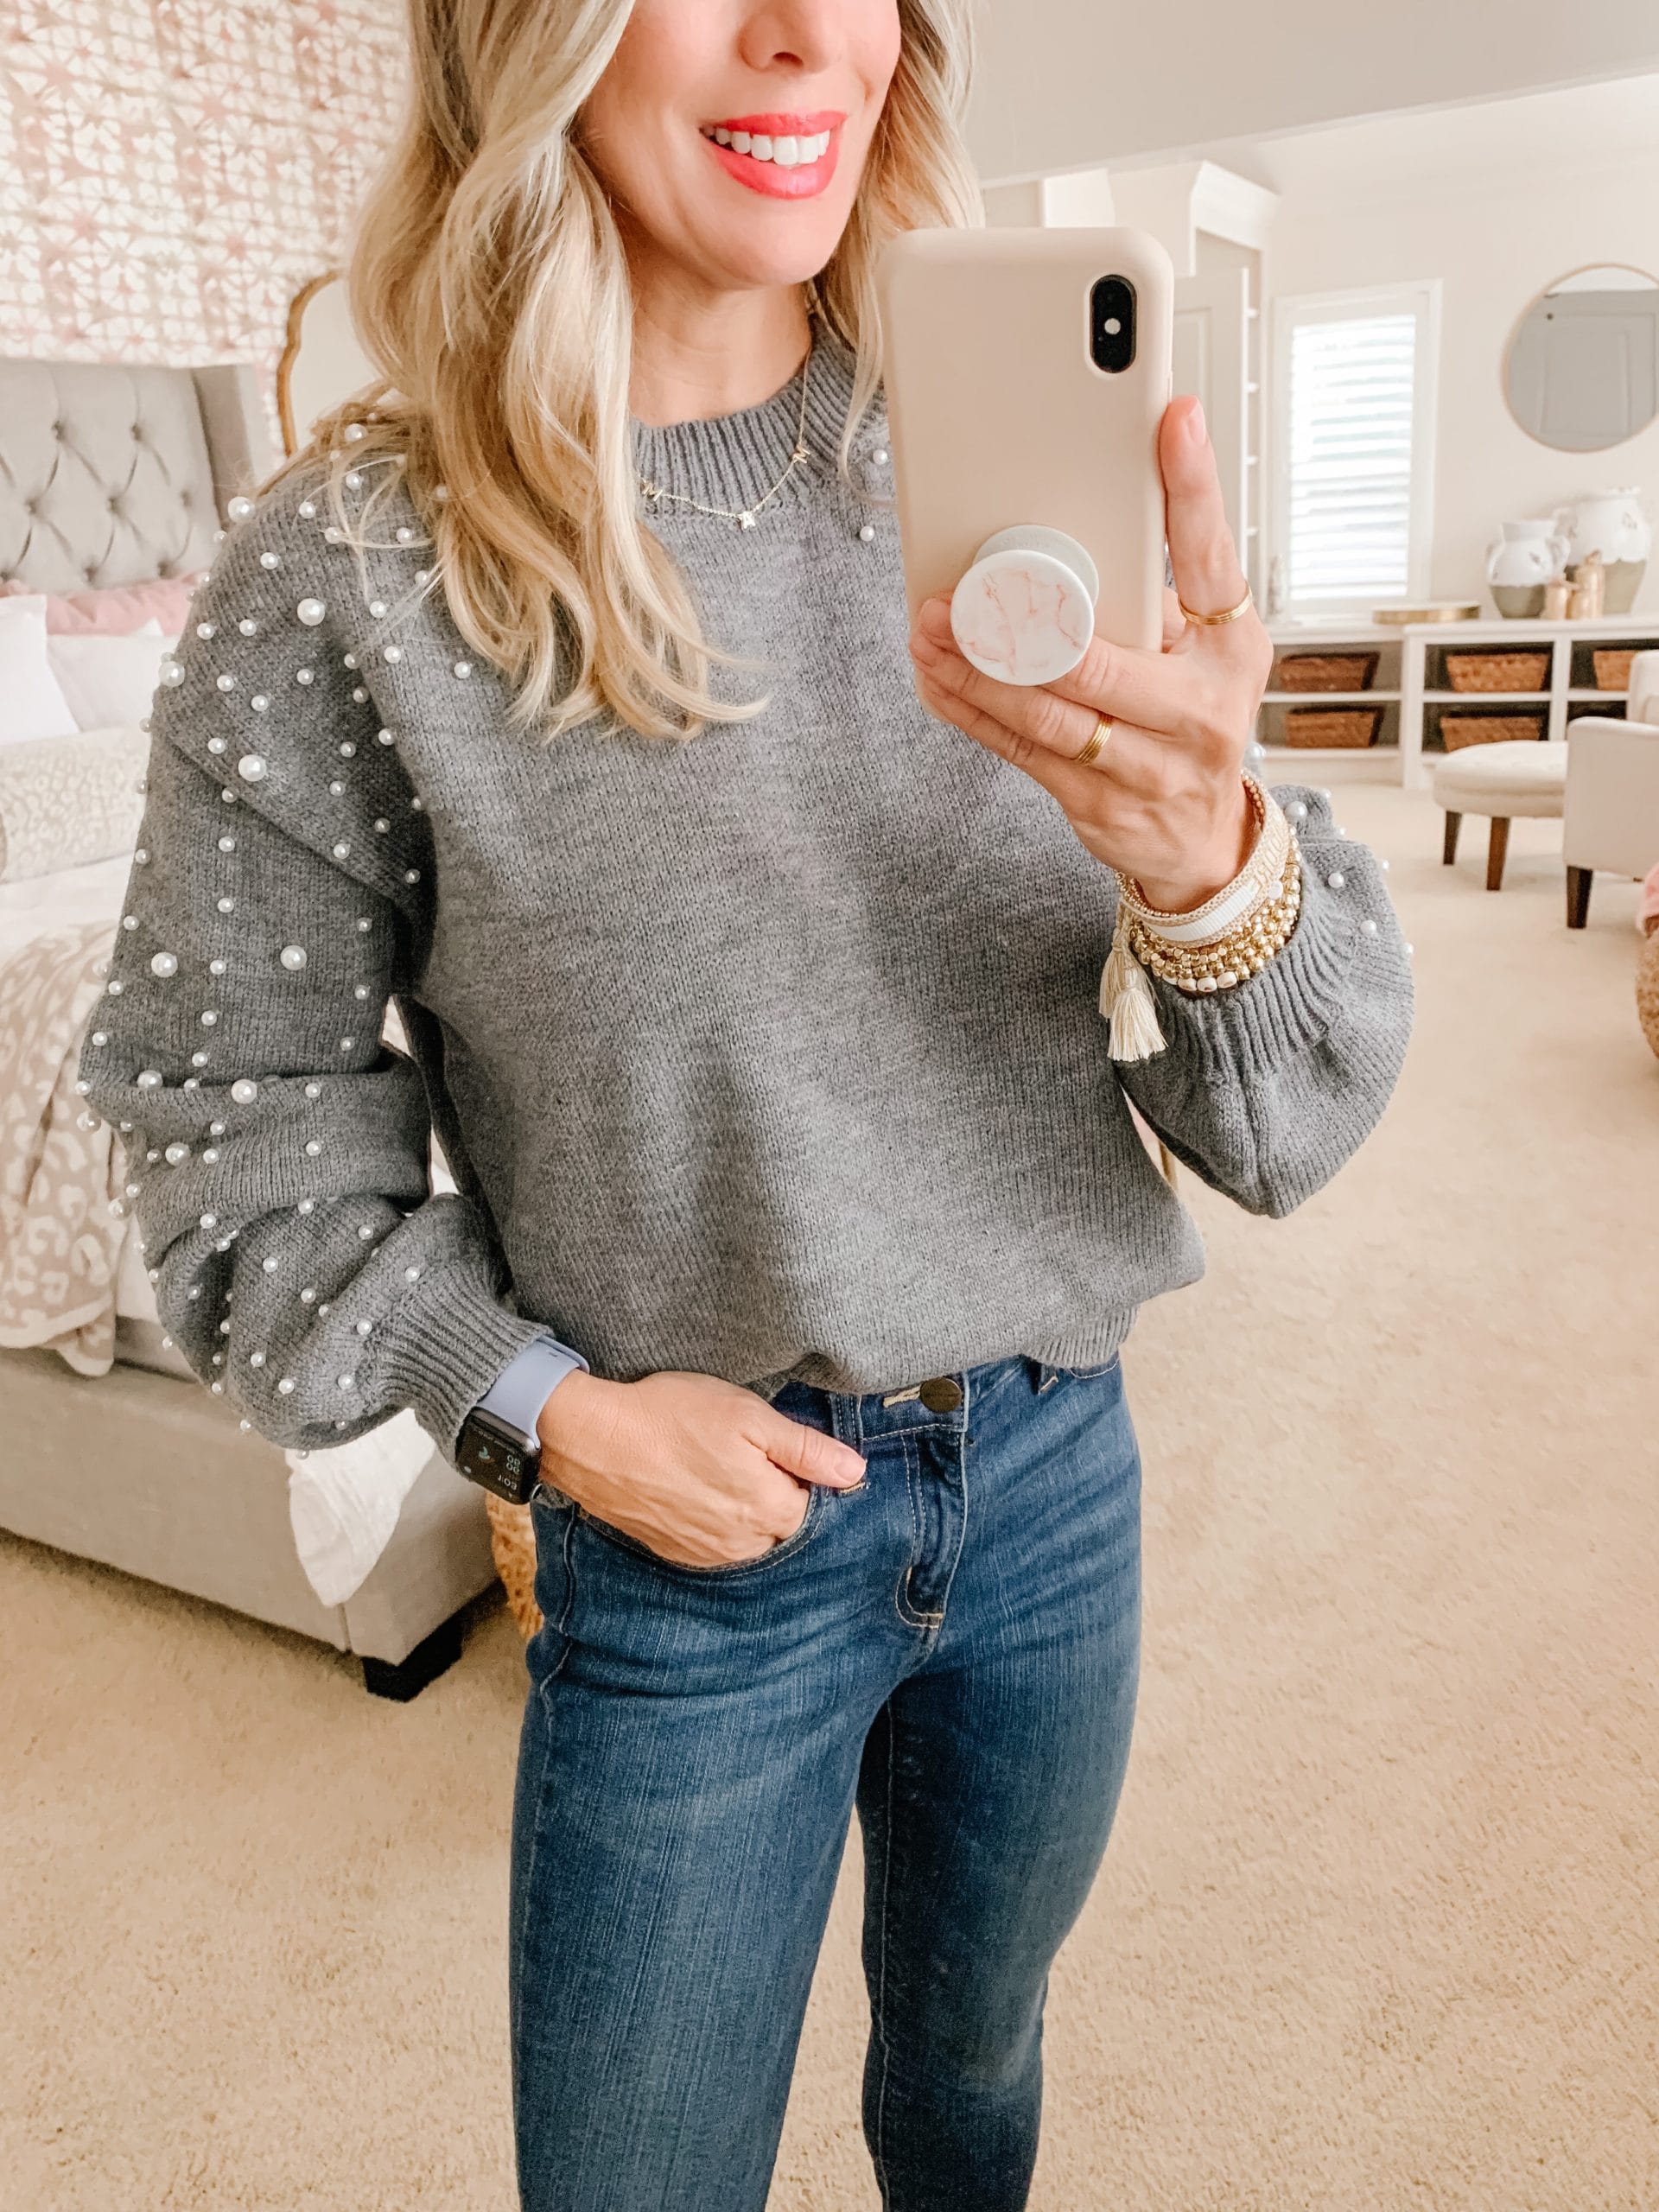 Amazon fashion, Pearl sweater, jeans, booties 